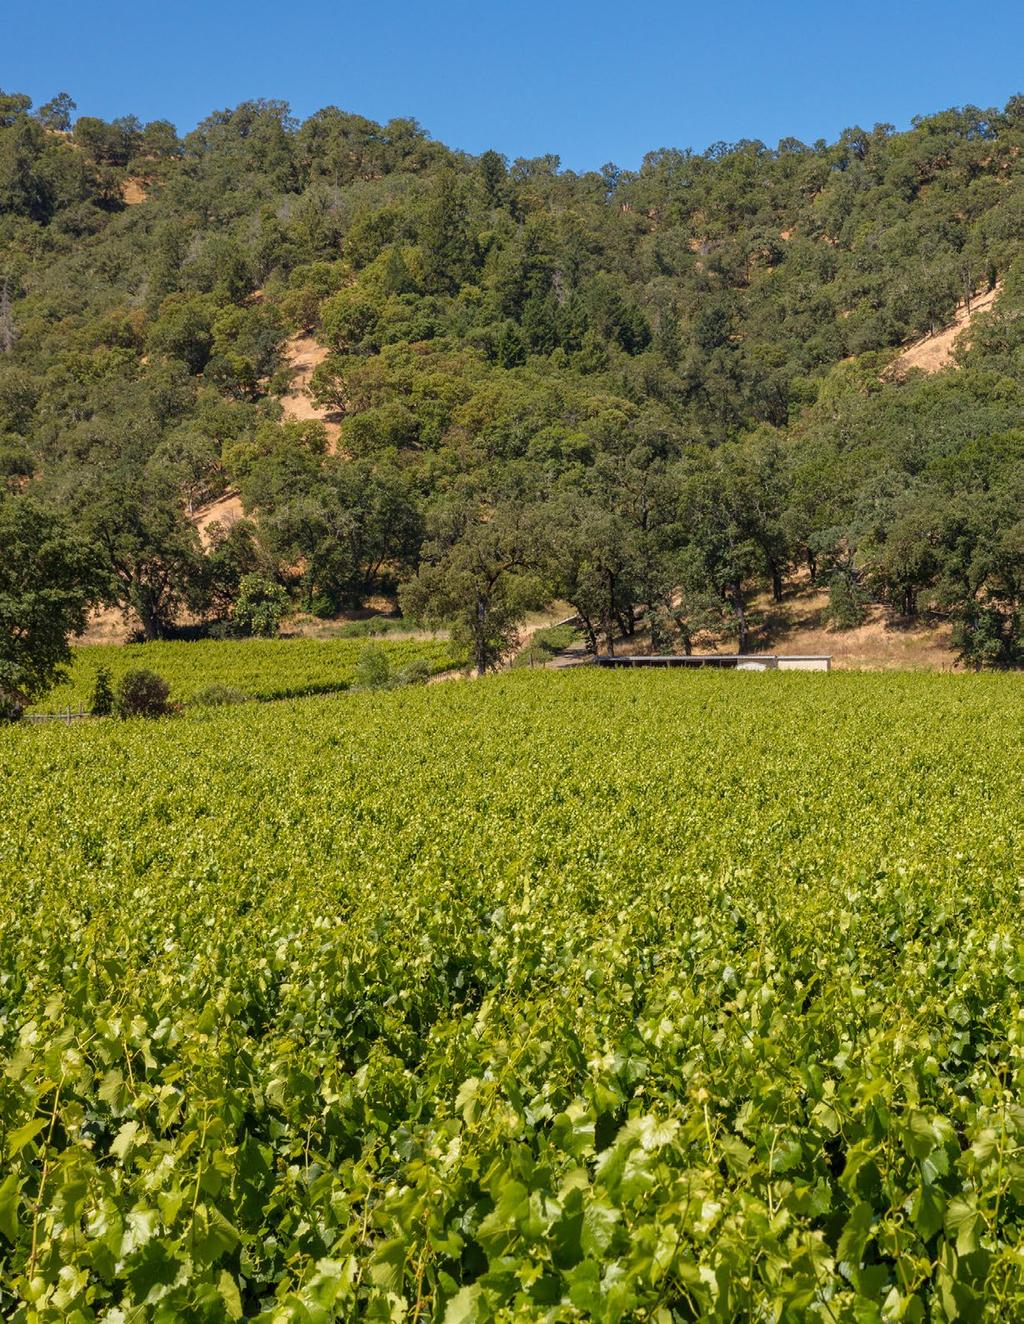 Located in highly desirable Mendocino County, this income property includes a 14 +/- acre Chardonnay vineyard that is leased and farmed by a successful local management company.